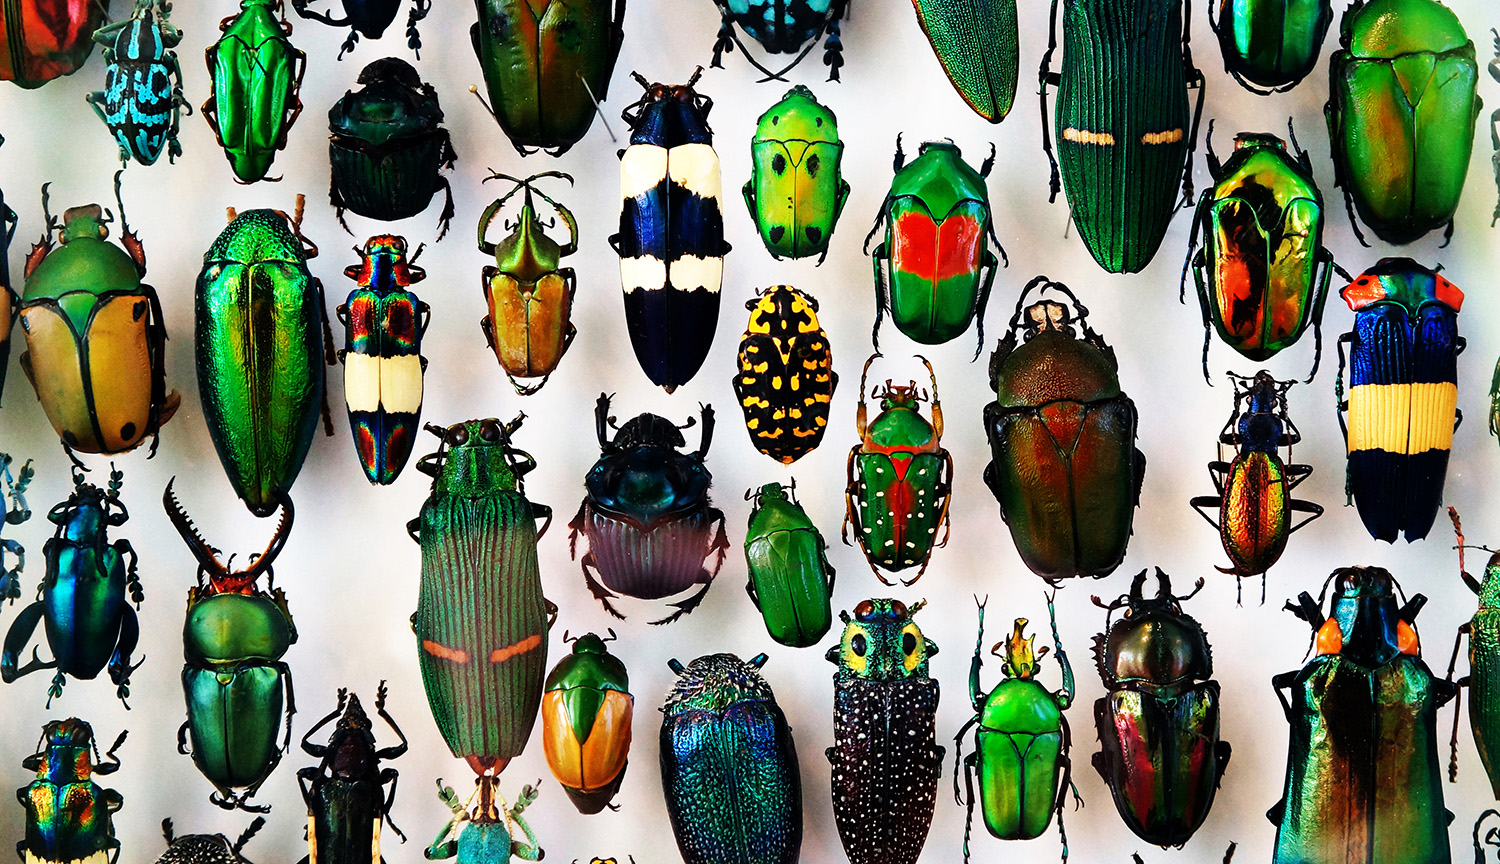 Photo shows a colorful collection of more than a dozen different sized insects atop a white background.